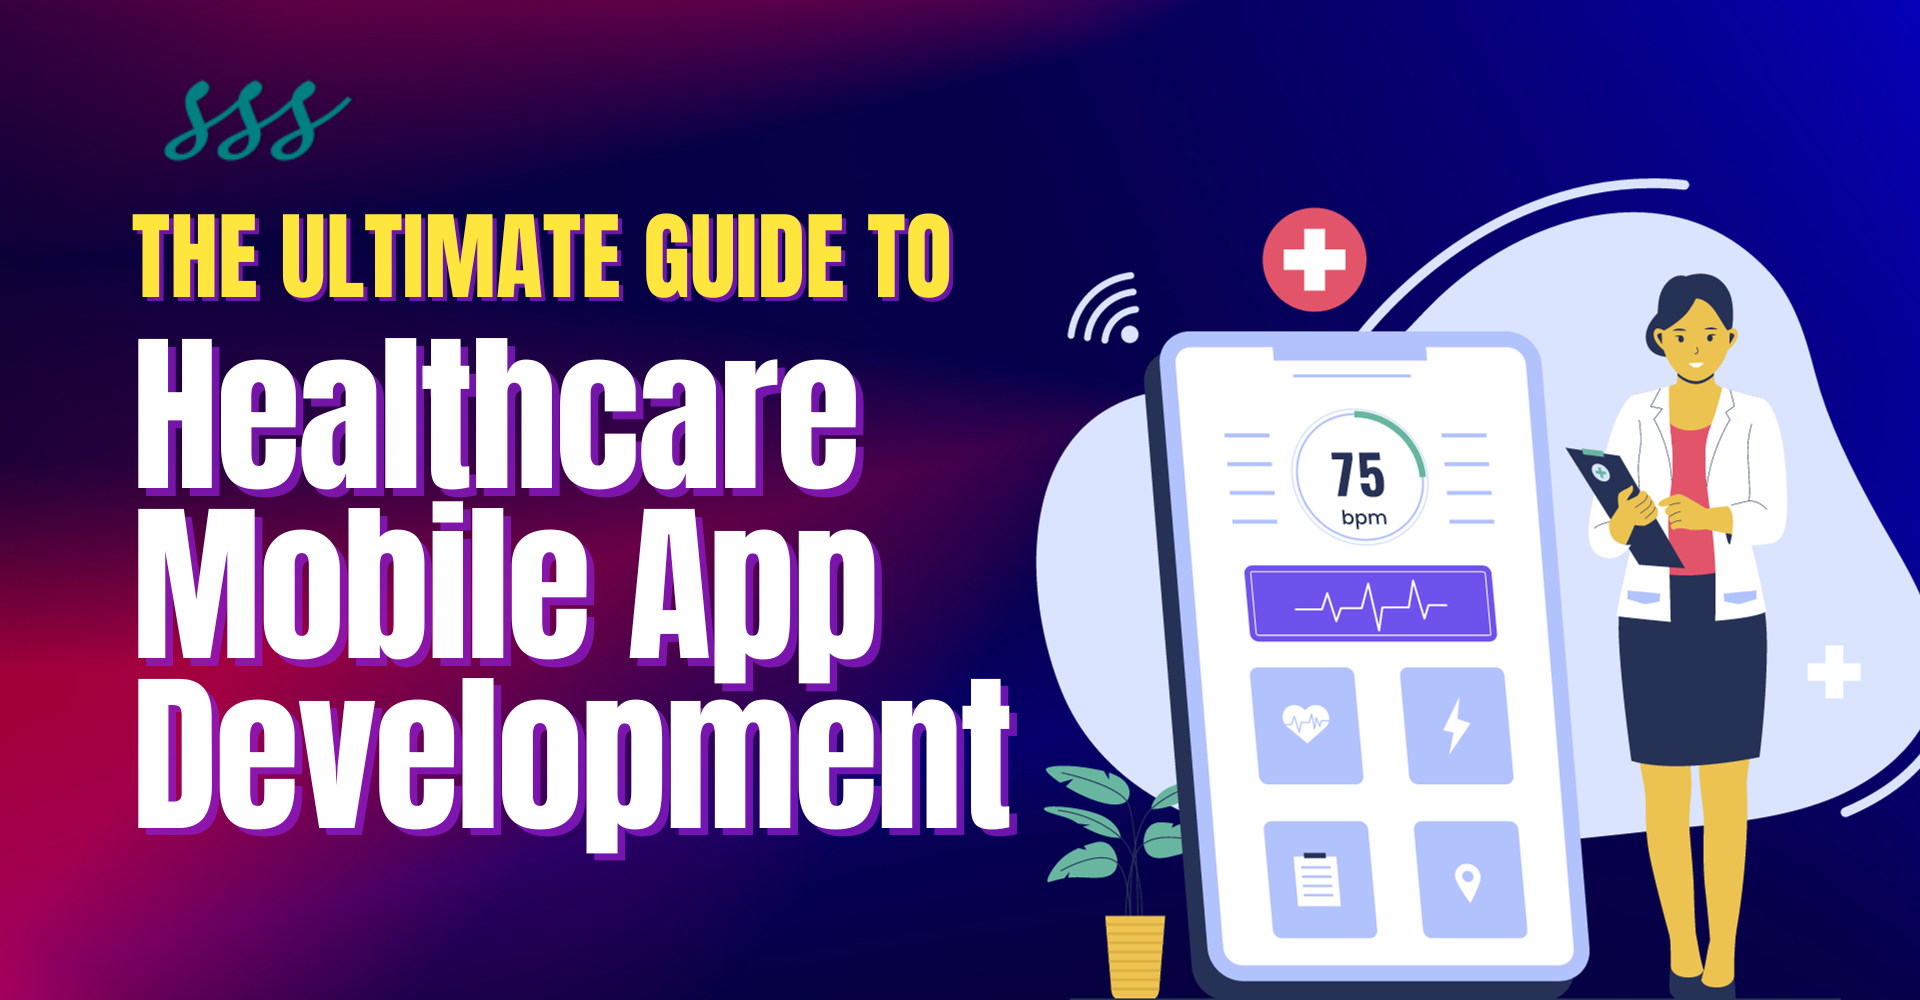 The Ultimate Guide to Healthcare Mobile App Development